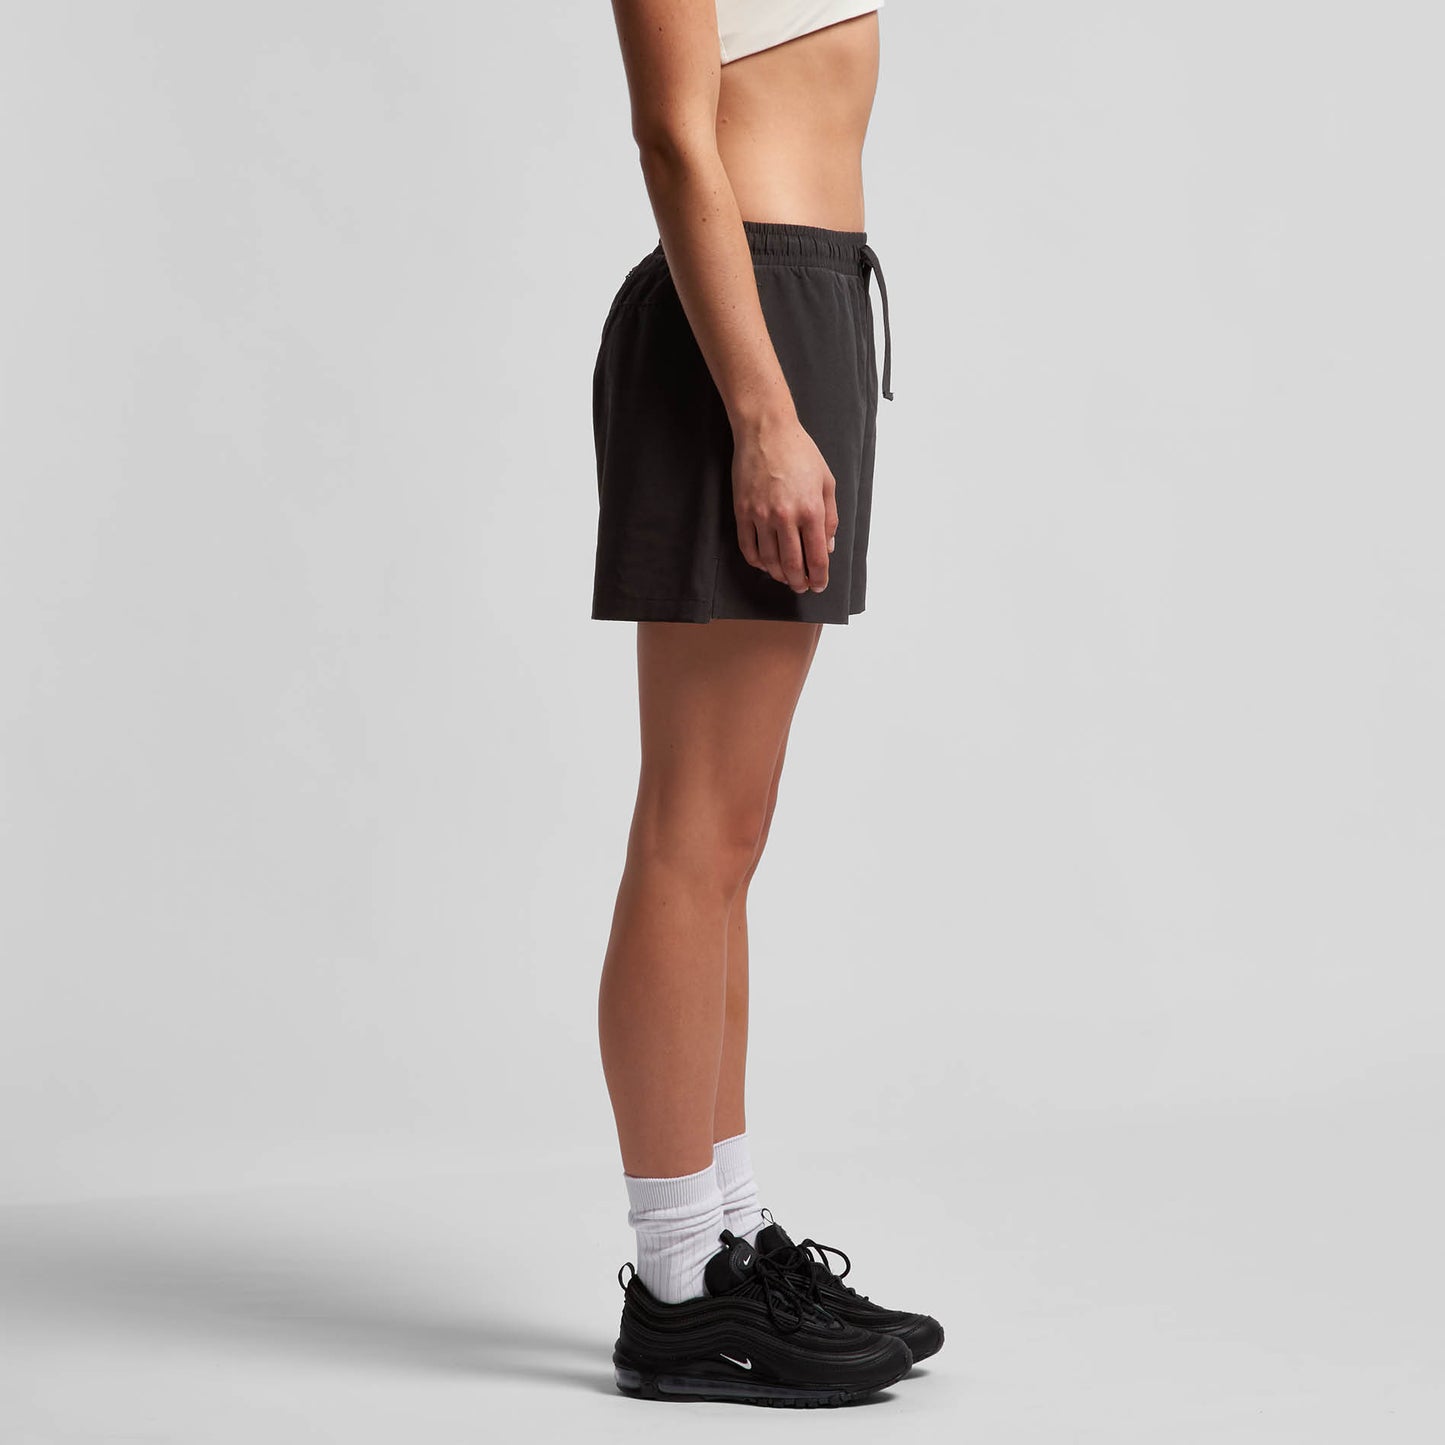 "Edible" Embroidered Women's Active Work Out Shorts